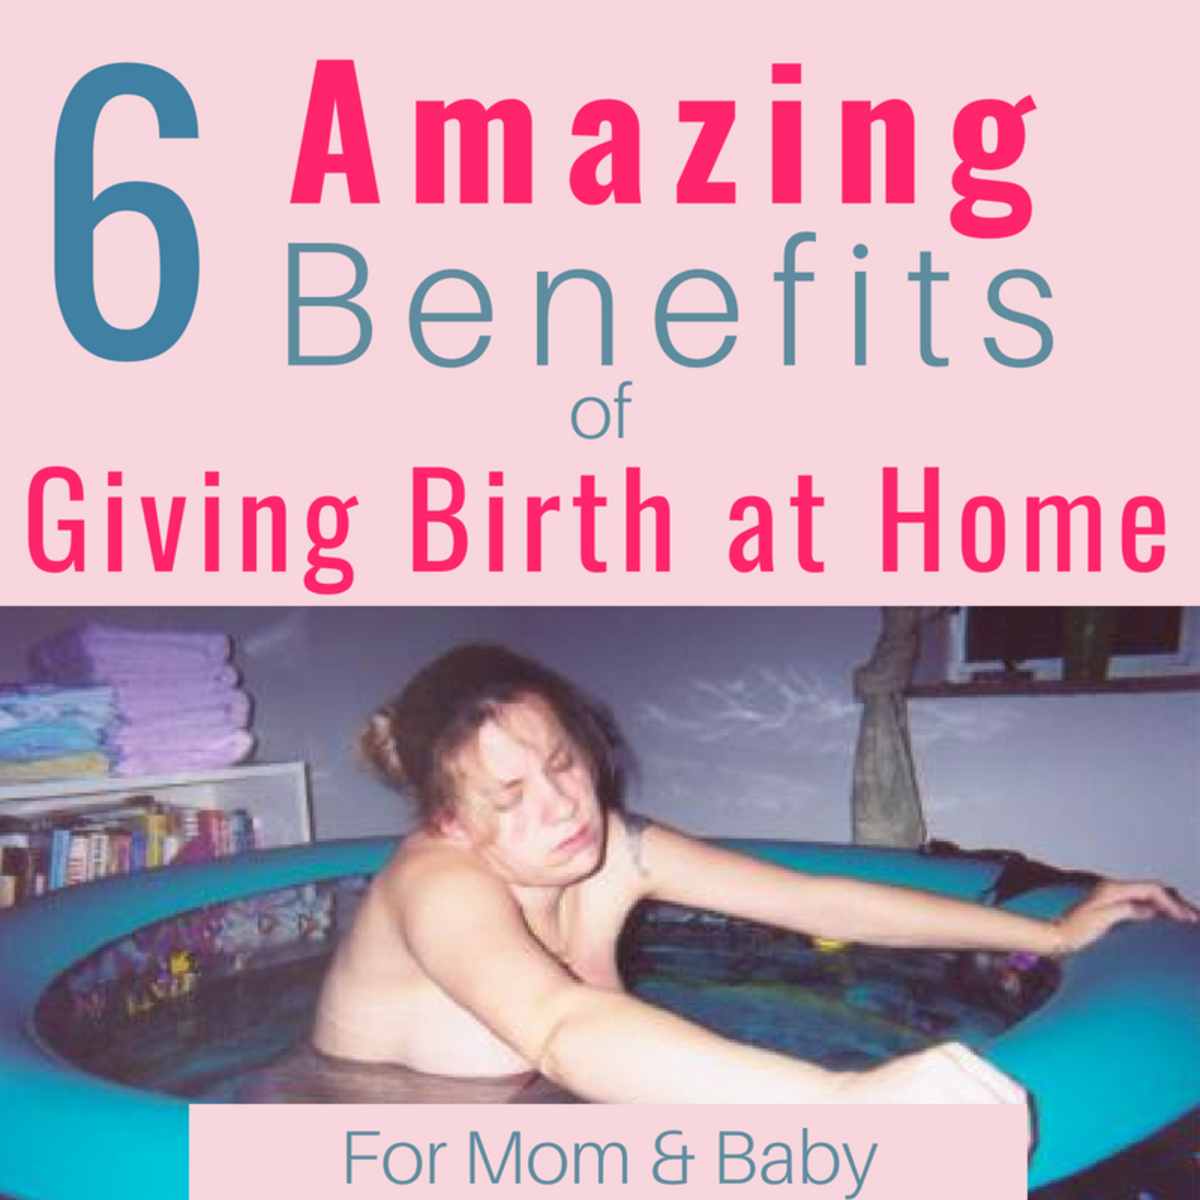 Top Six Benefits of Giving Birth at Home